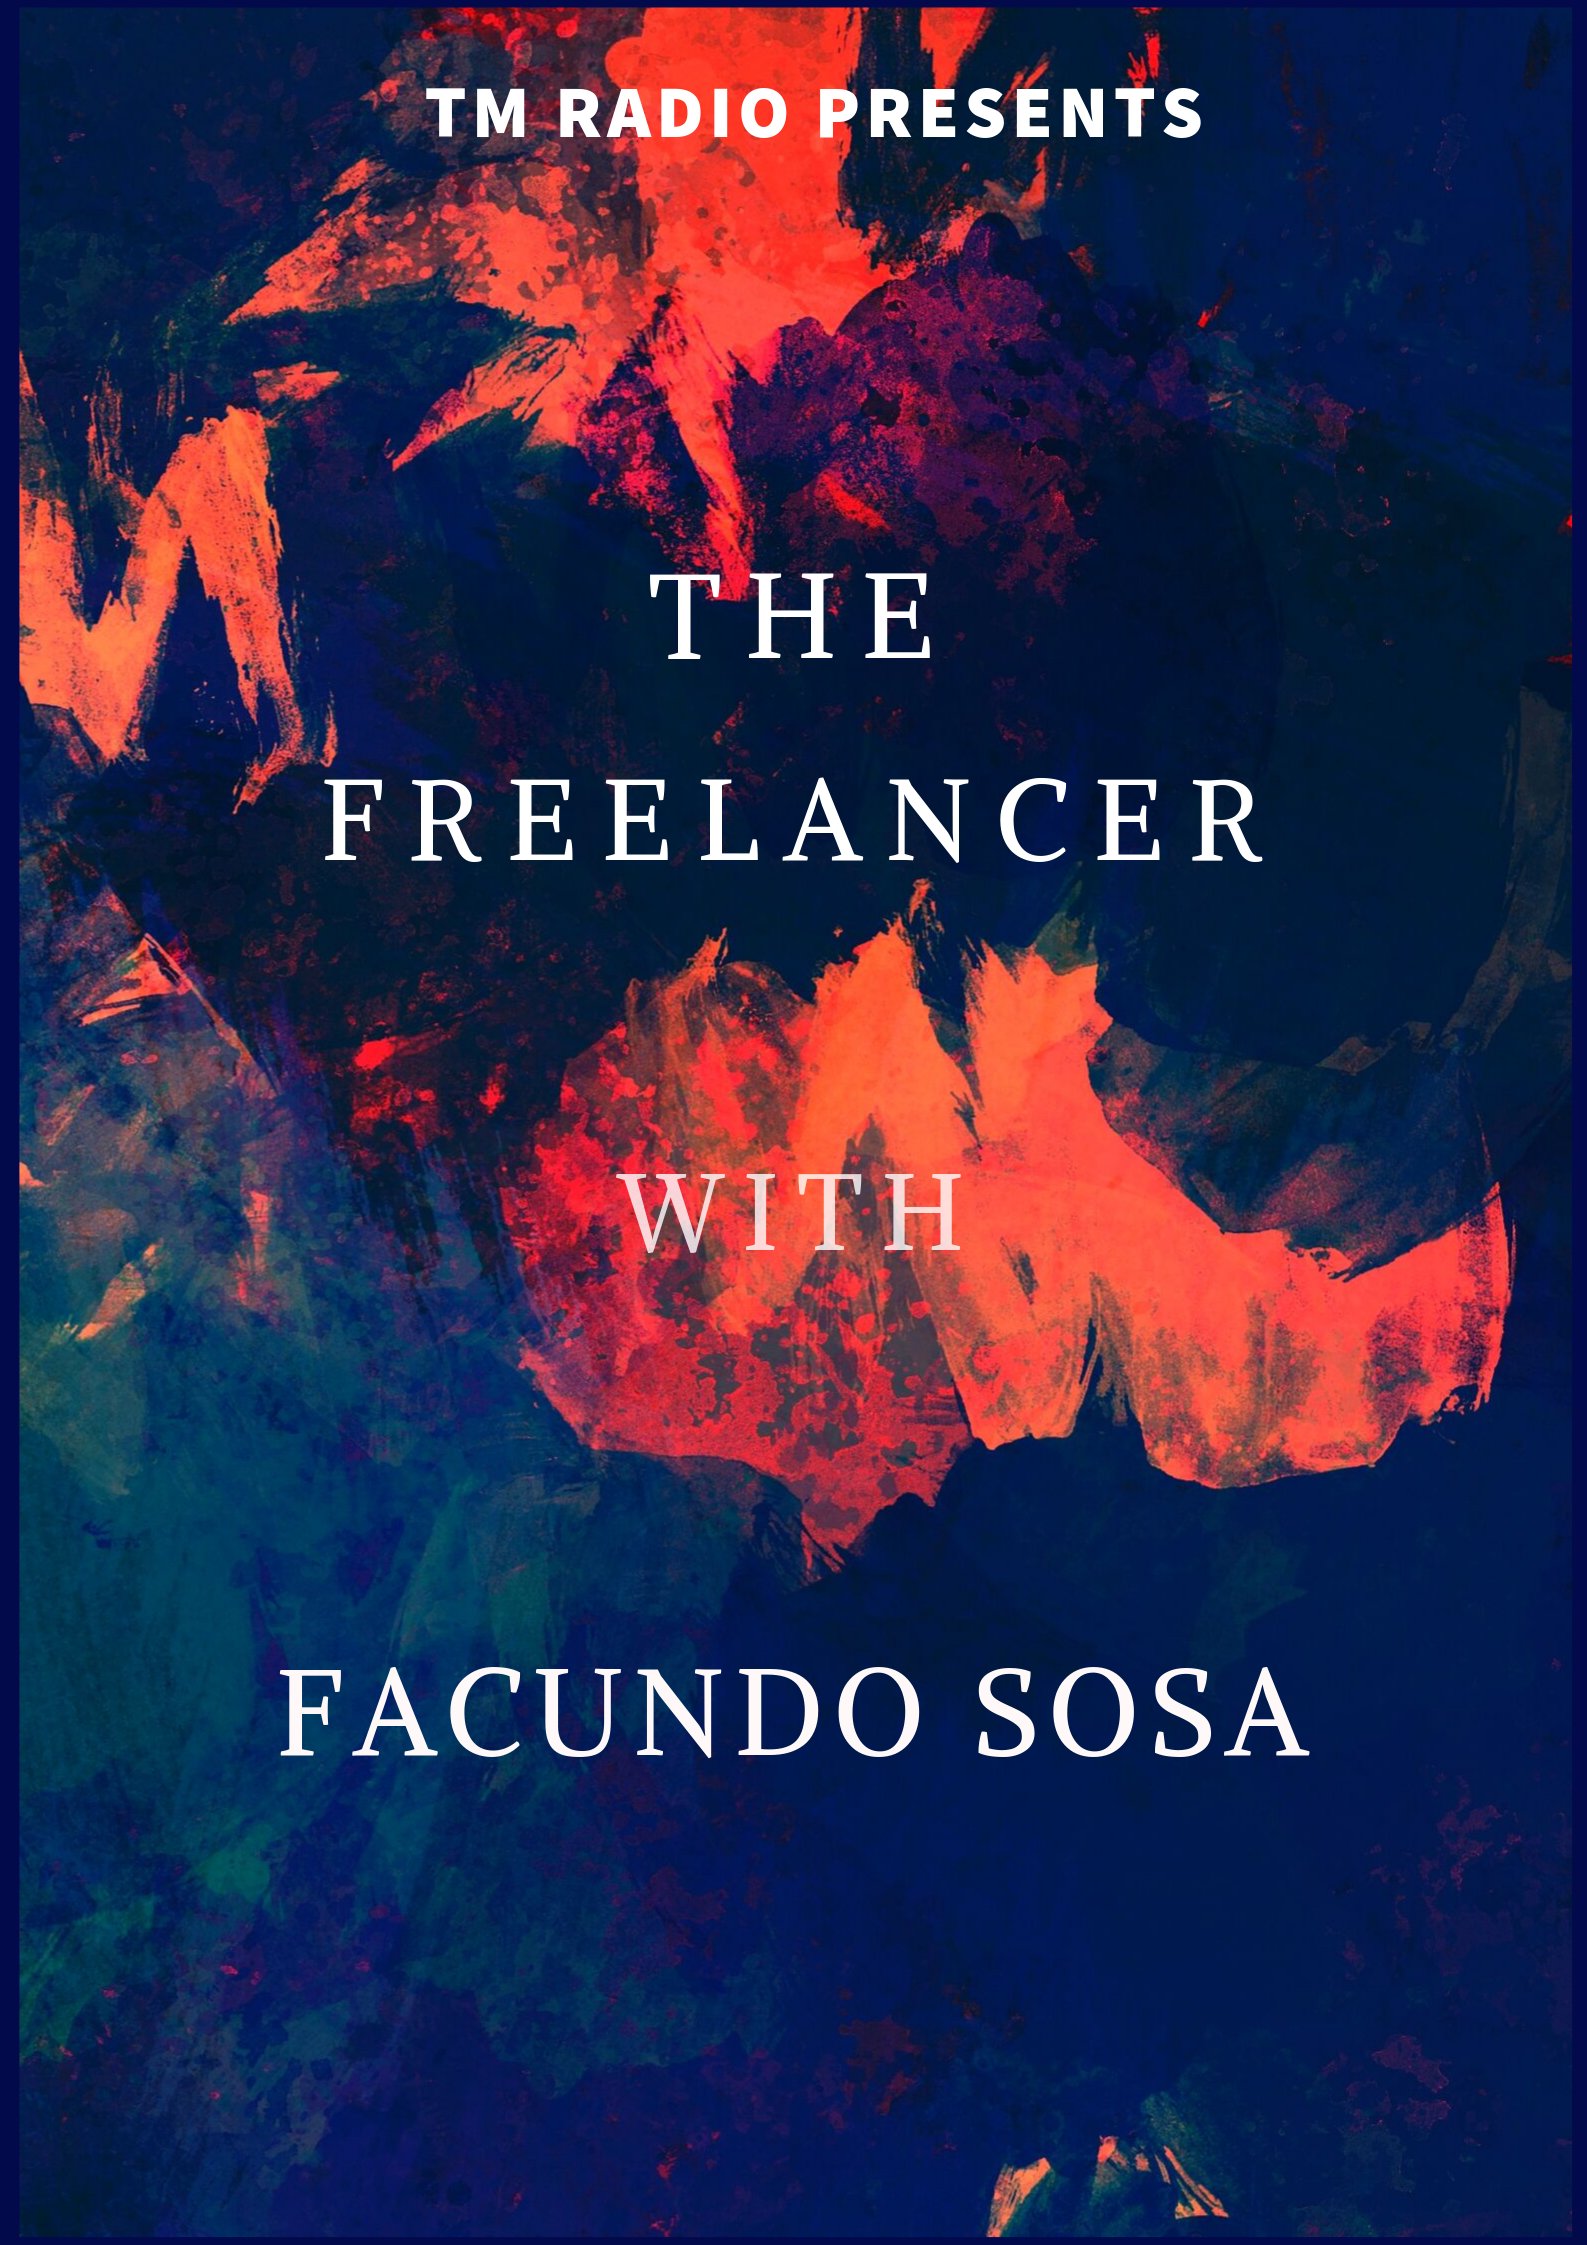 The Freelancer :: Episode 020 (aired on February 28th, 2021) banner logo